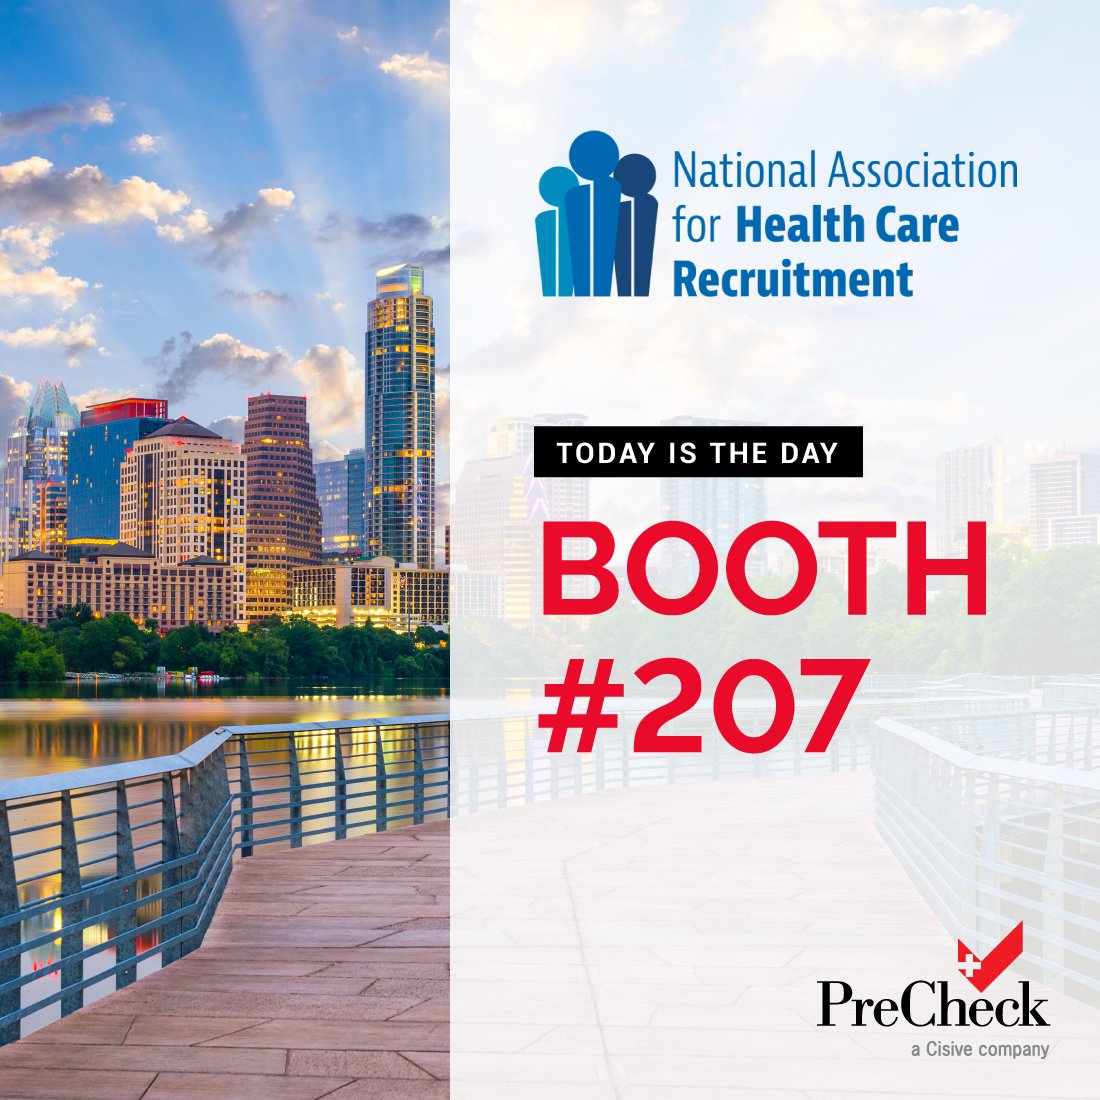 Are you attending #NAHCR23? Visit booth #207 to chat 1:1 with our team of healthcare background check experts and discover how we can help streamline your #healthcarerecruitment process!

👉 Plus, spin our prize wheel and enter our raffle to win a $250 Amazon gift card!